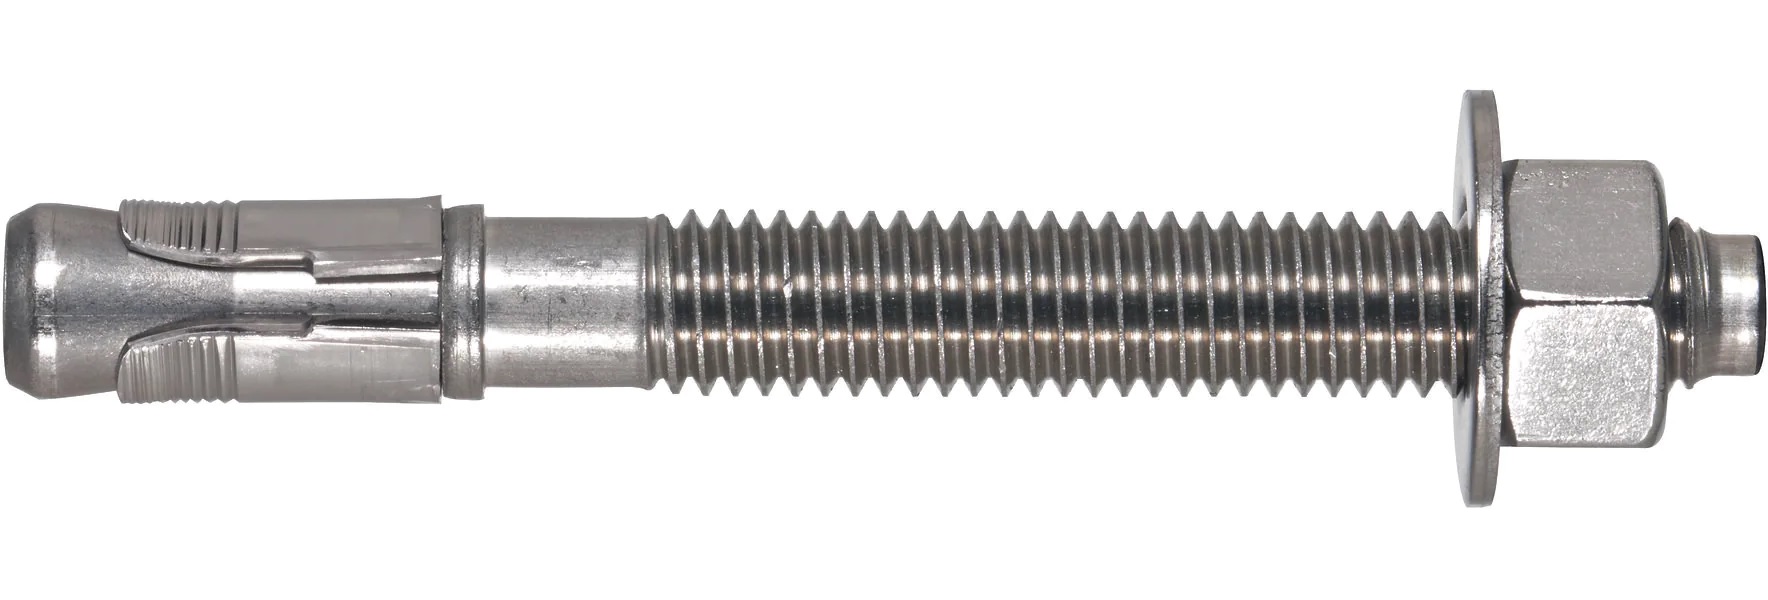 Stud anchor KB3 SS304 1/4x2 1/4 (Sold in BOX of 100)